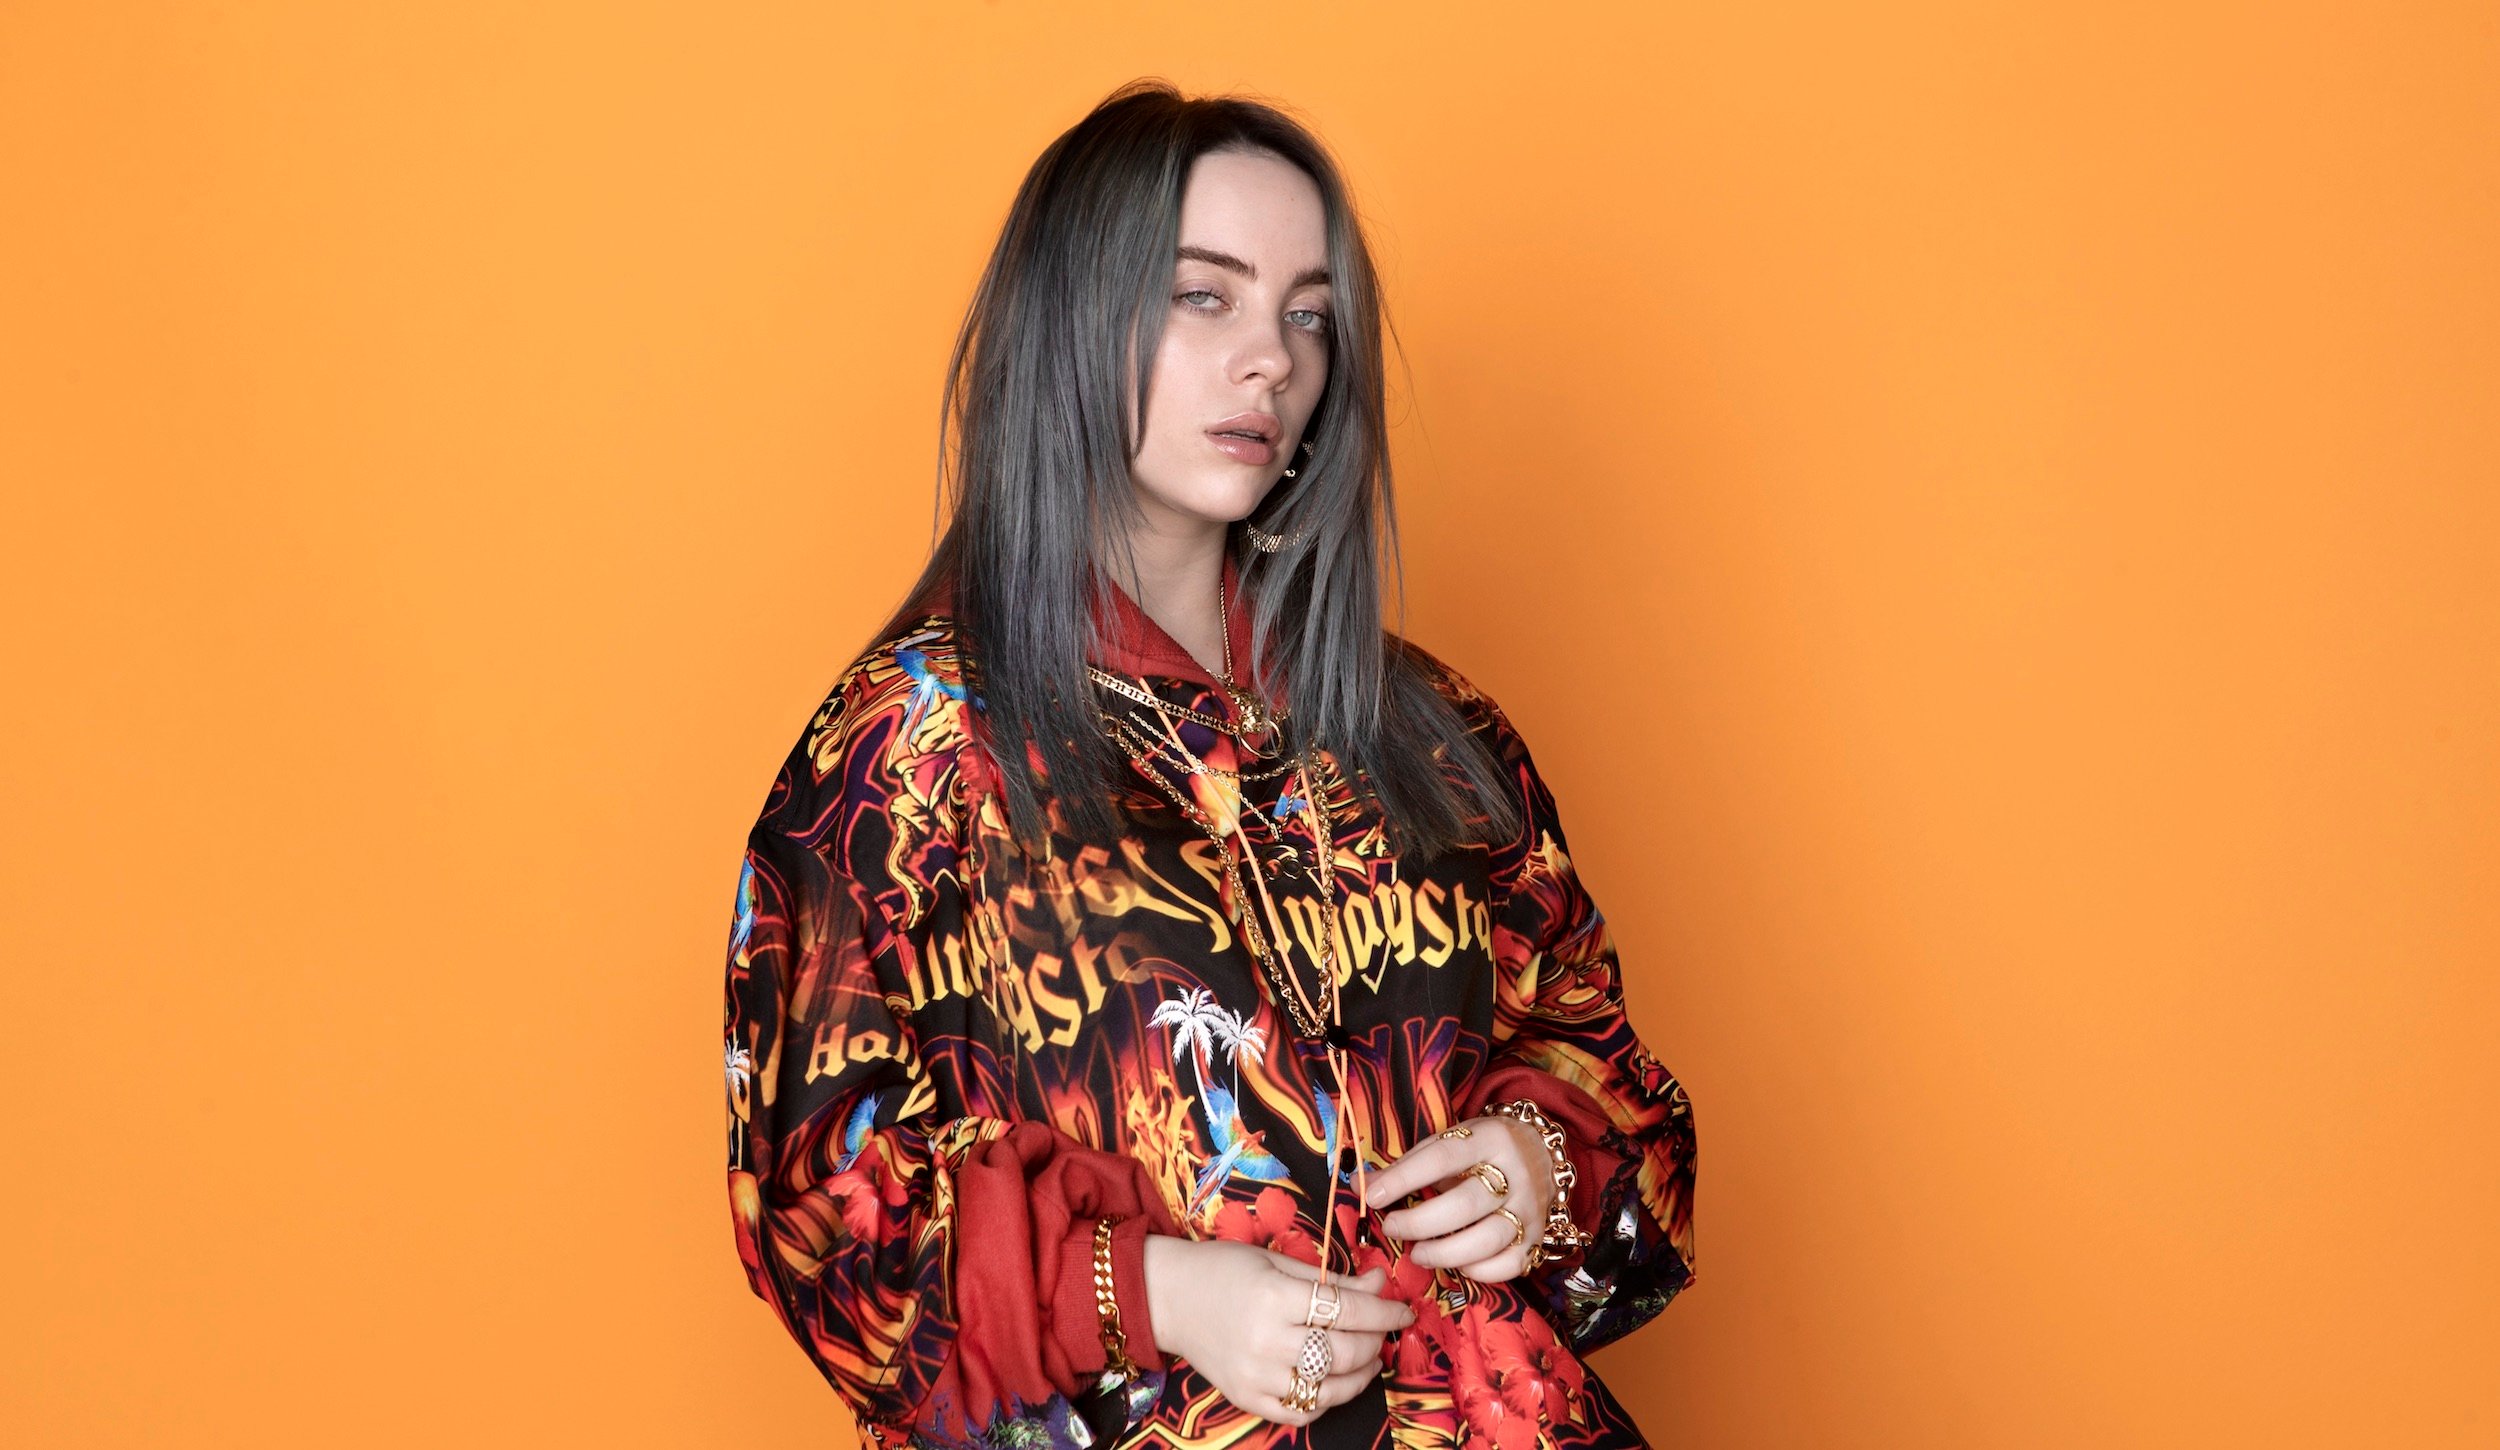 How Billie Eilish snatched Lil Nas X’s Billboard crown & what it means for the music industry